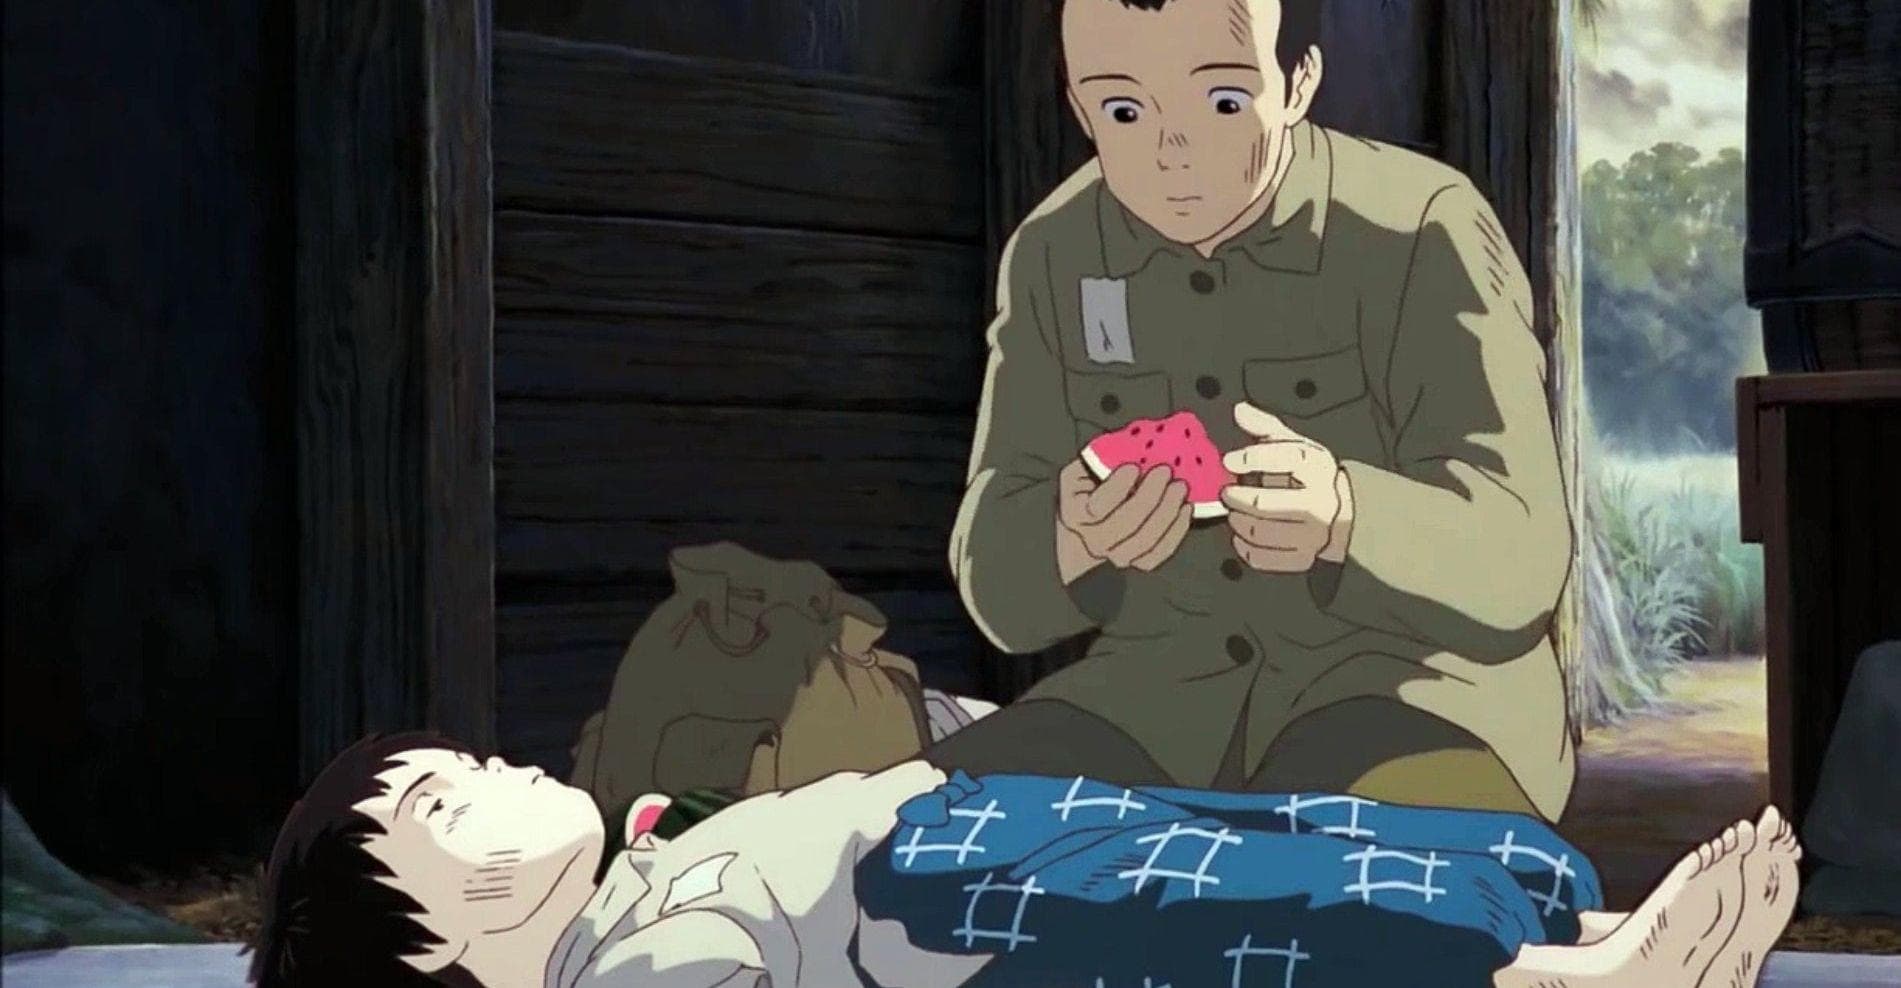 The 15 Saddest Anime Scenes of All Time, Ranked